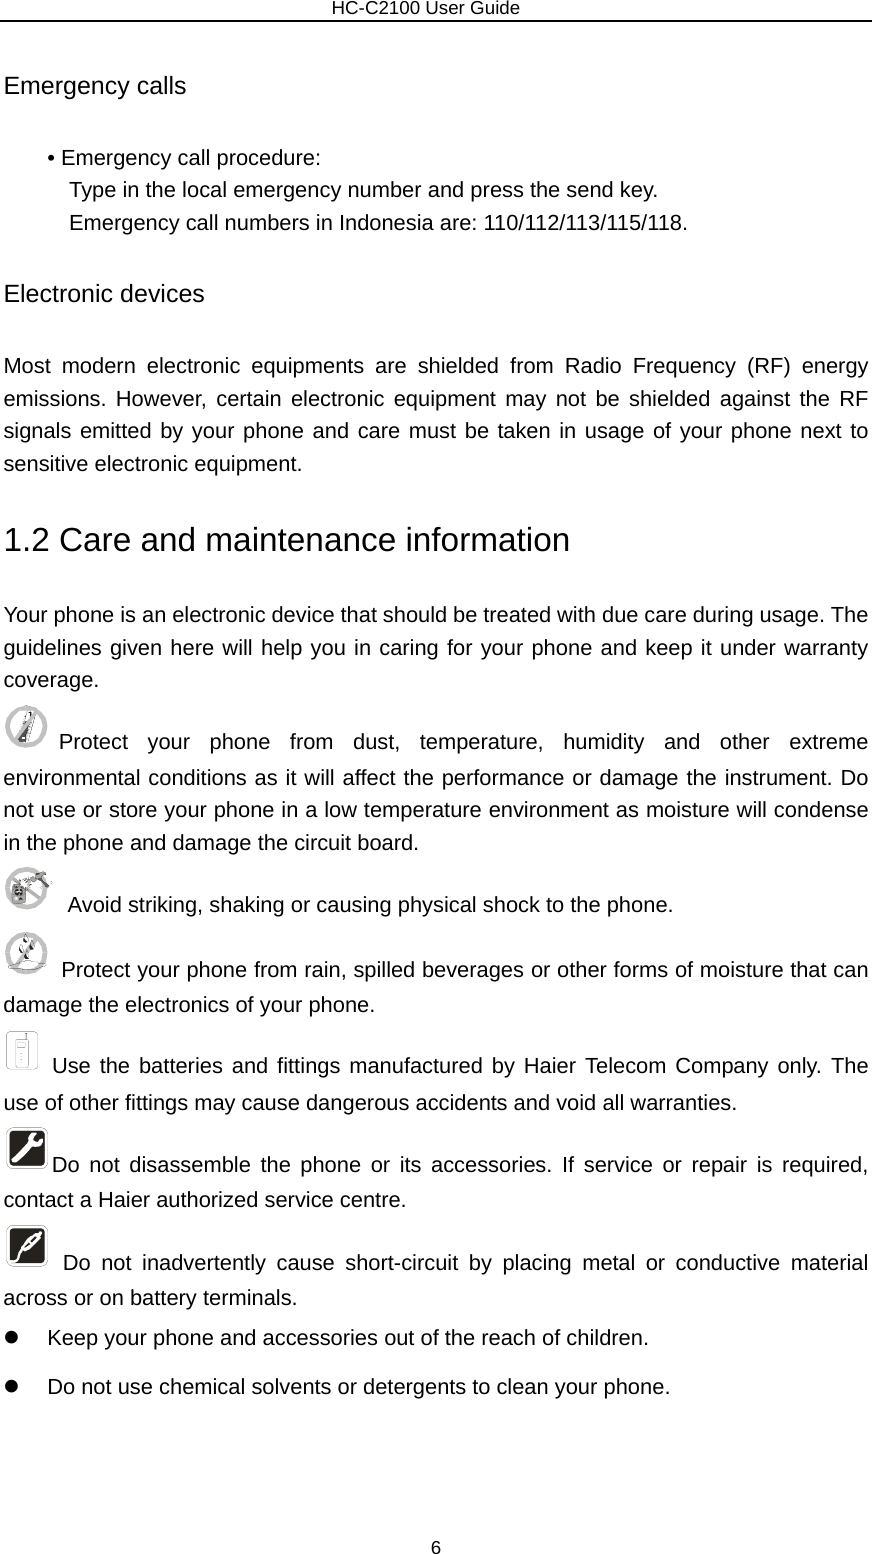                        HC-C2100 User Guide Emergency calls • Emergency call procedure: Type in the local emergency number and press the send key. Emergency call numbers in Indonesia are: 110/112/113/115/118. Electronic devices Most modern electronic equipments are shielded from Radio Frequency (RF) energy emissions. However, certain electronic equipment may not be shielded against the RF signals emitted by your phone and care must be taken in usage of your phone next to sensitive electronic equipment. 1.2 Care and maintenance information   Your phone is an electronic device that should be treated with due care during usage. The guidelines given here will help you in caring for your phone and keep it under warranty coverage. Protect your phone from dust, temperature, humidity and other extreme environmental conditions as it will affect the performance or damage the instrument. Do not use or store your phone in a low temperature environment as moisture will condense in the phone and damage the circuit board.   Avoid striking, shaking or causing physical shock to the phone.     Protect your phone from rain, spilled beverages or other forms of moisture that can damage the electronics of your phone.  Use the batteries and fittings manufactured by Haier Telecom Company only. The use of other fittings may cause dangerous accidents and void all warranties. Do not disassemble the phone or its accessories. If service or repair is required, contact a Haier authorized service centre.    Do not inadvertently cause short-circuit by placing metal or conductive material across or on battery terminals. z  Keep your phone and accessories out of the reach of children. z  Do not use chemical solvents or detergents to clean your phone.    6 